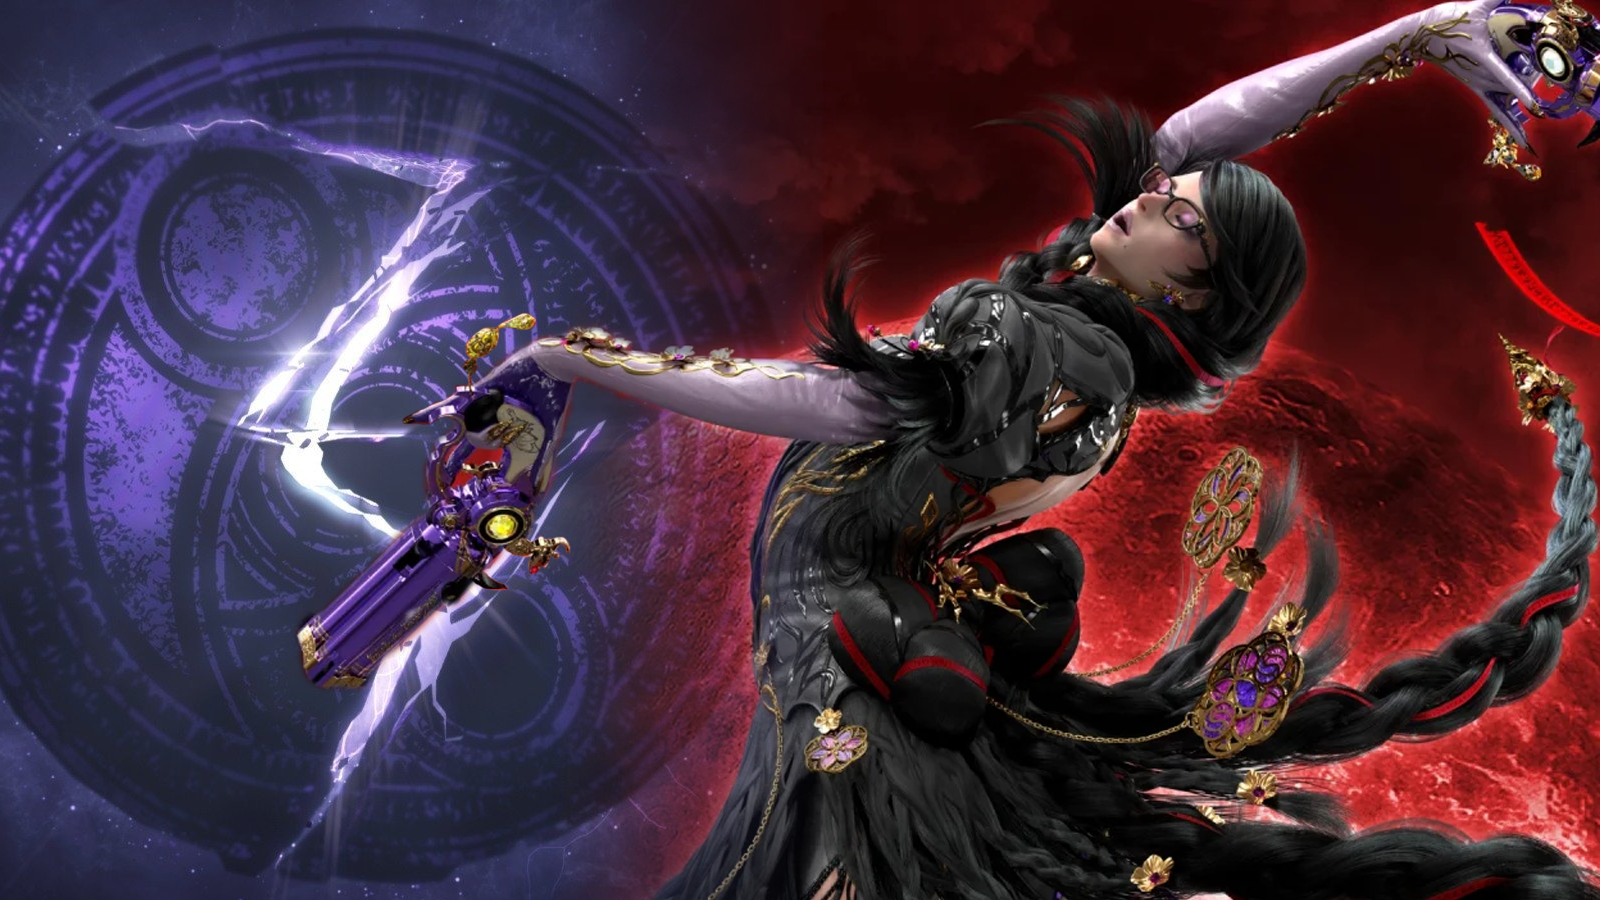 Bayonetta 640x1136 iPhone 5/5S/5C/SE wallpaper, background, picture, image